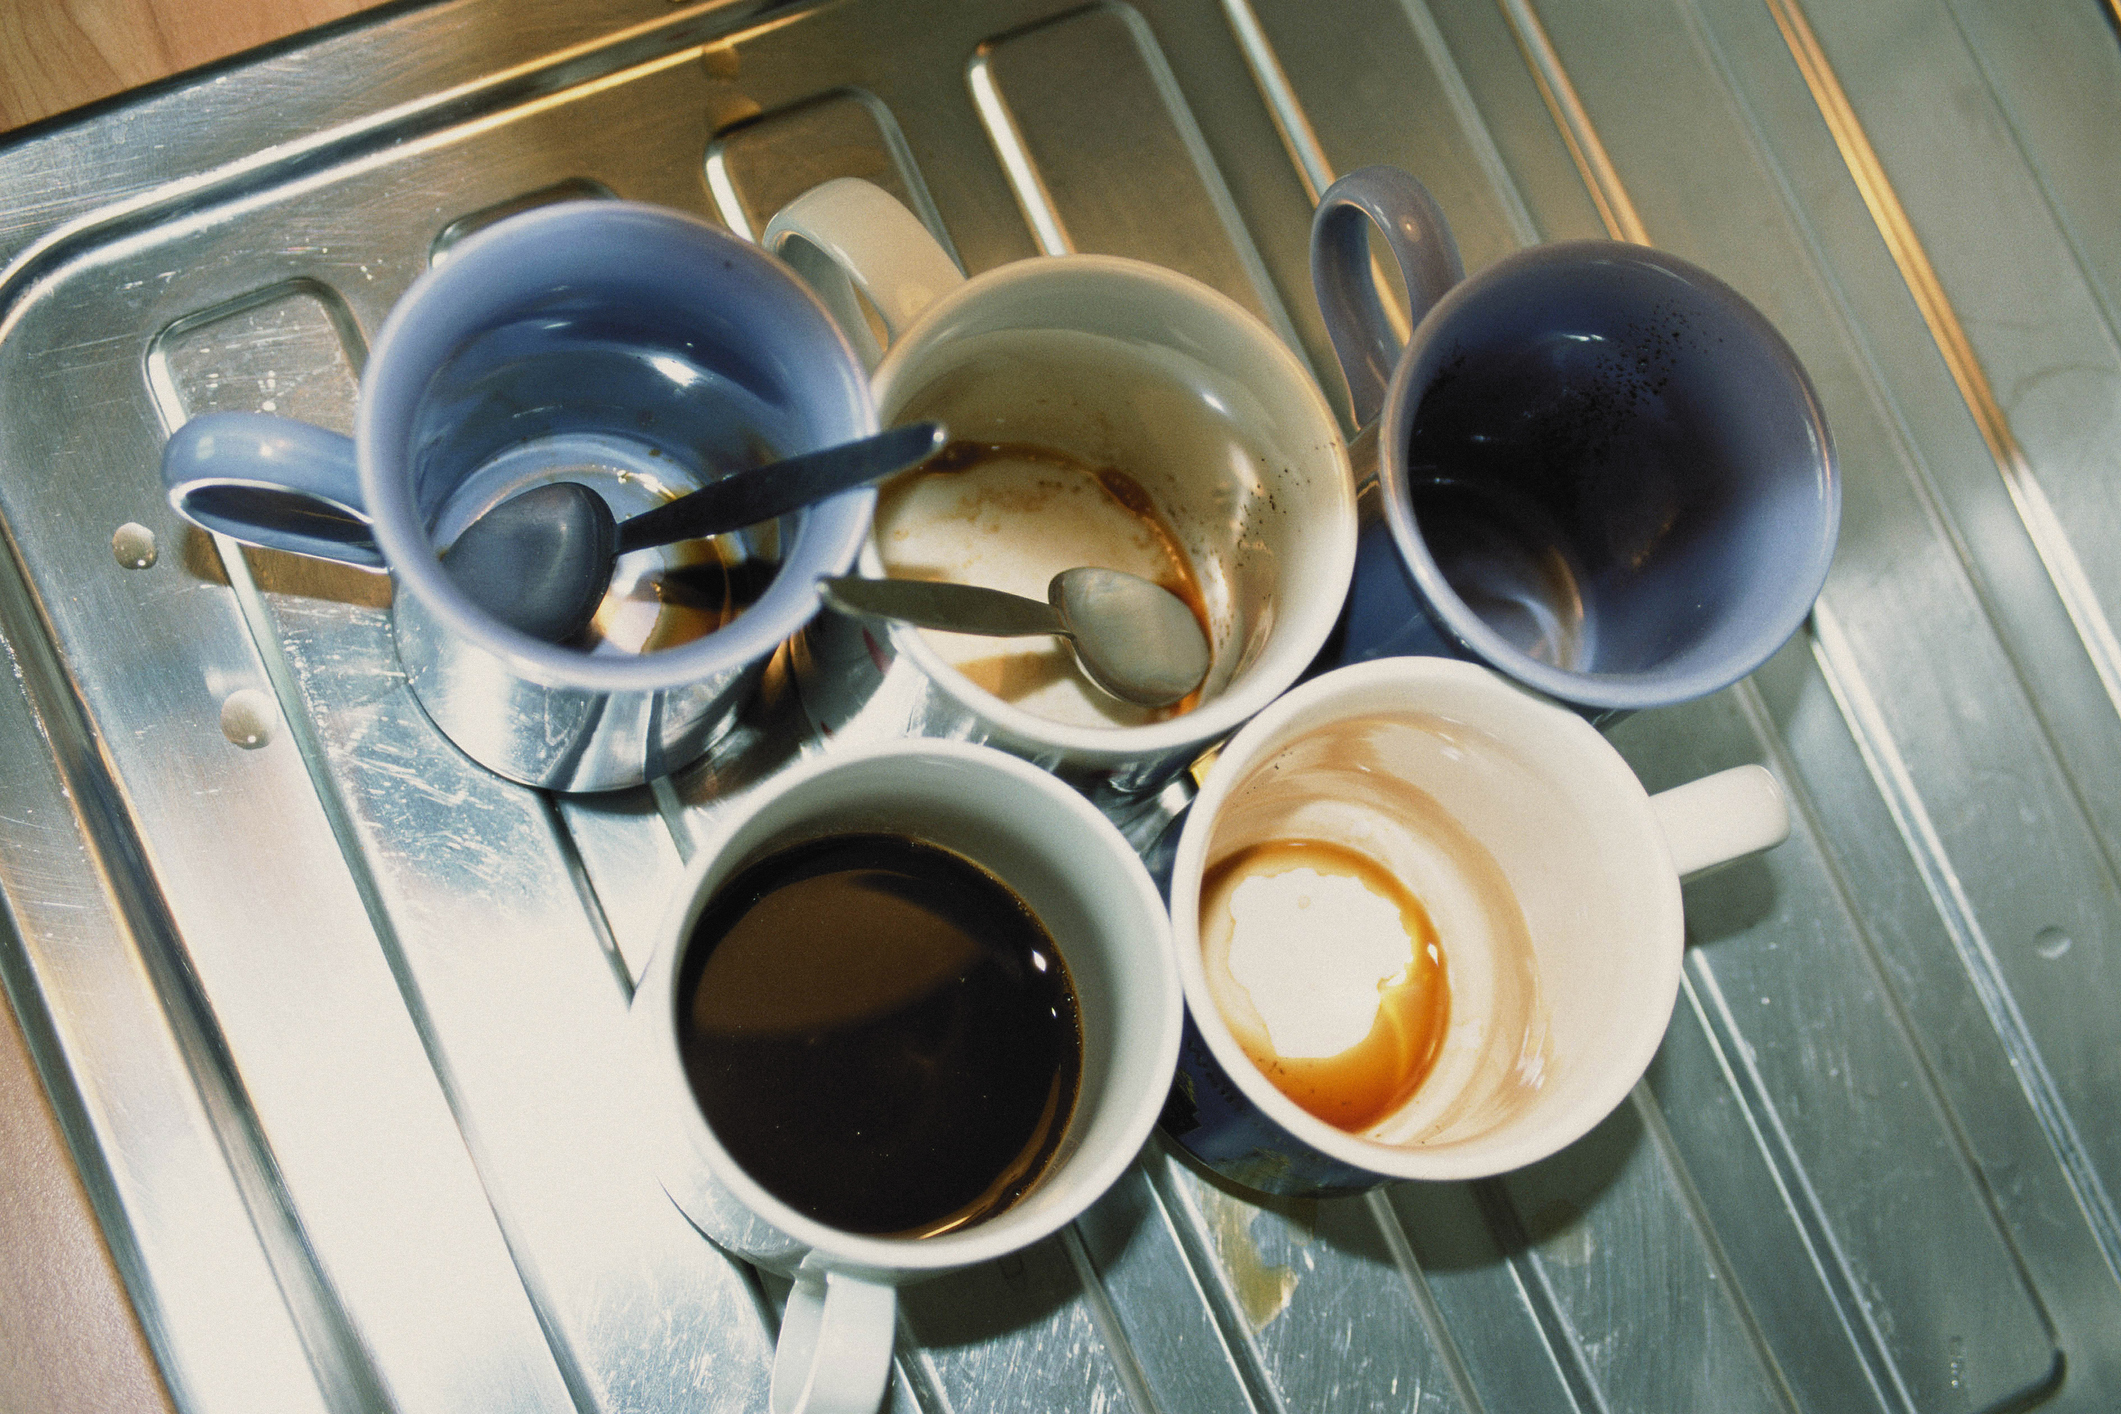 Four used coffee cups with spoons on a tray, one cup with leftover coffee